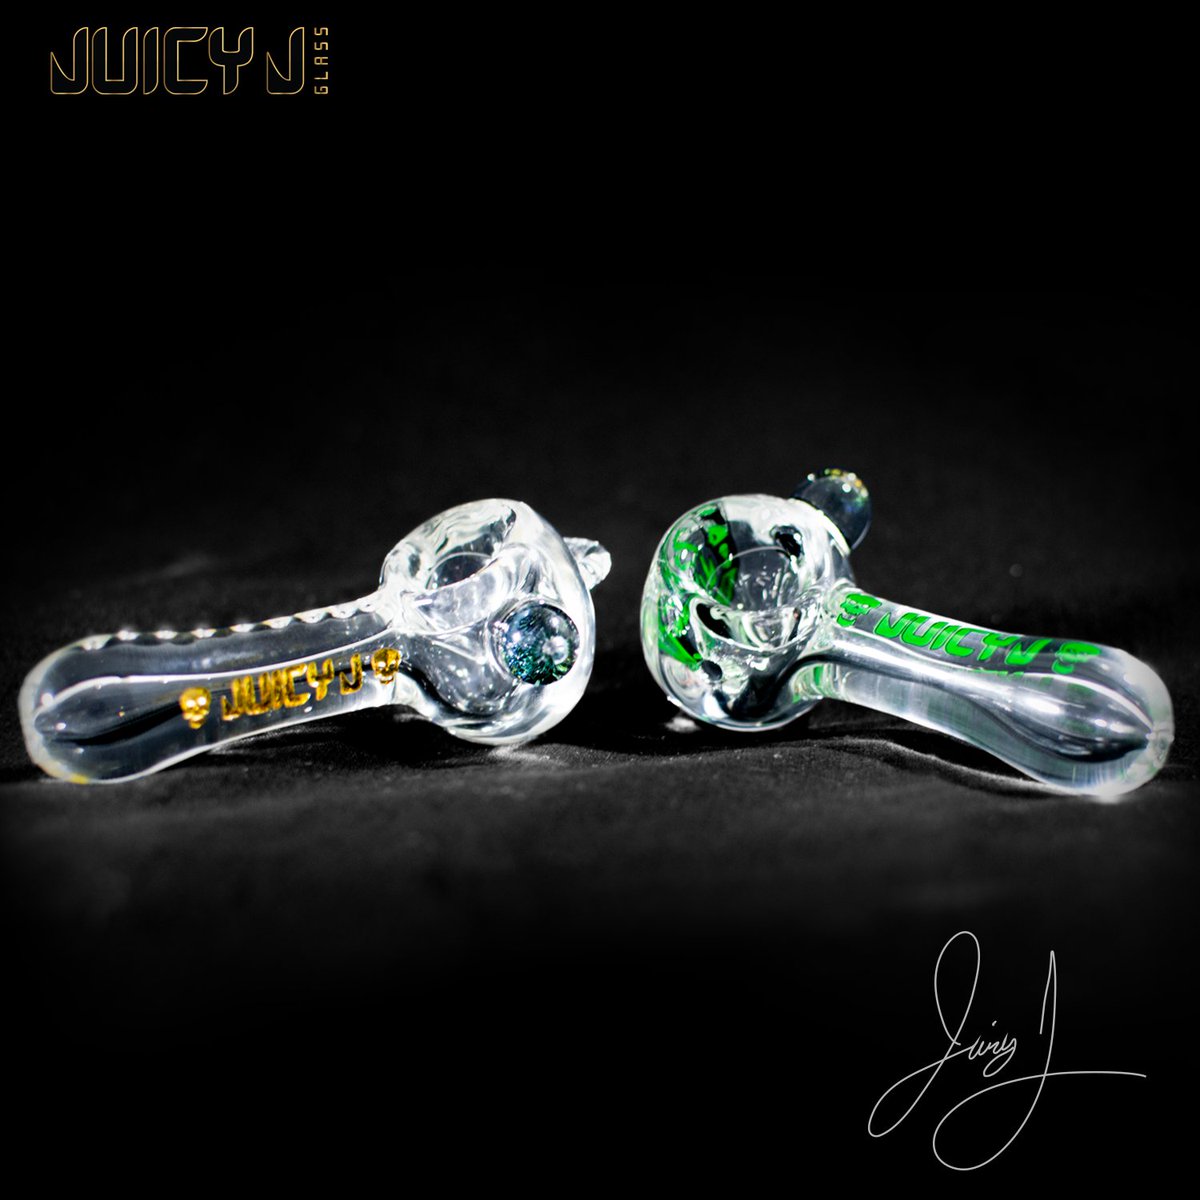 New #juicyjglass diamond hand pipes.....yes..it's lit 🔥🔥Get yours at juicyjglass.com We Trippy Mane!!!!!!!!!!!!!!